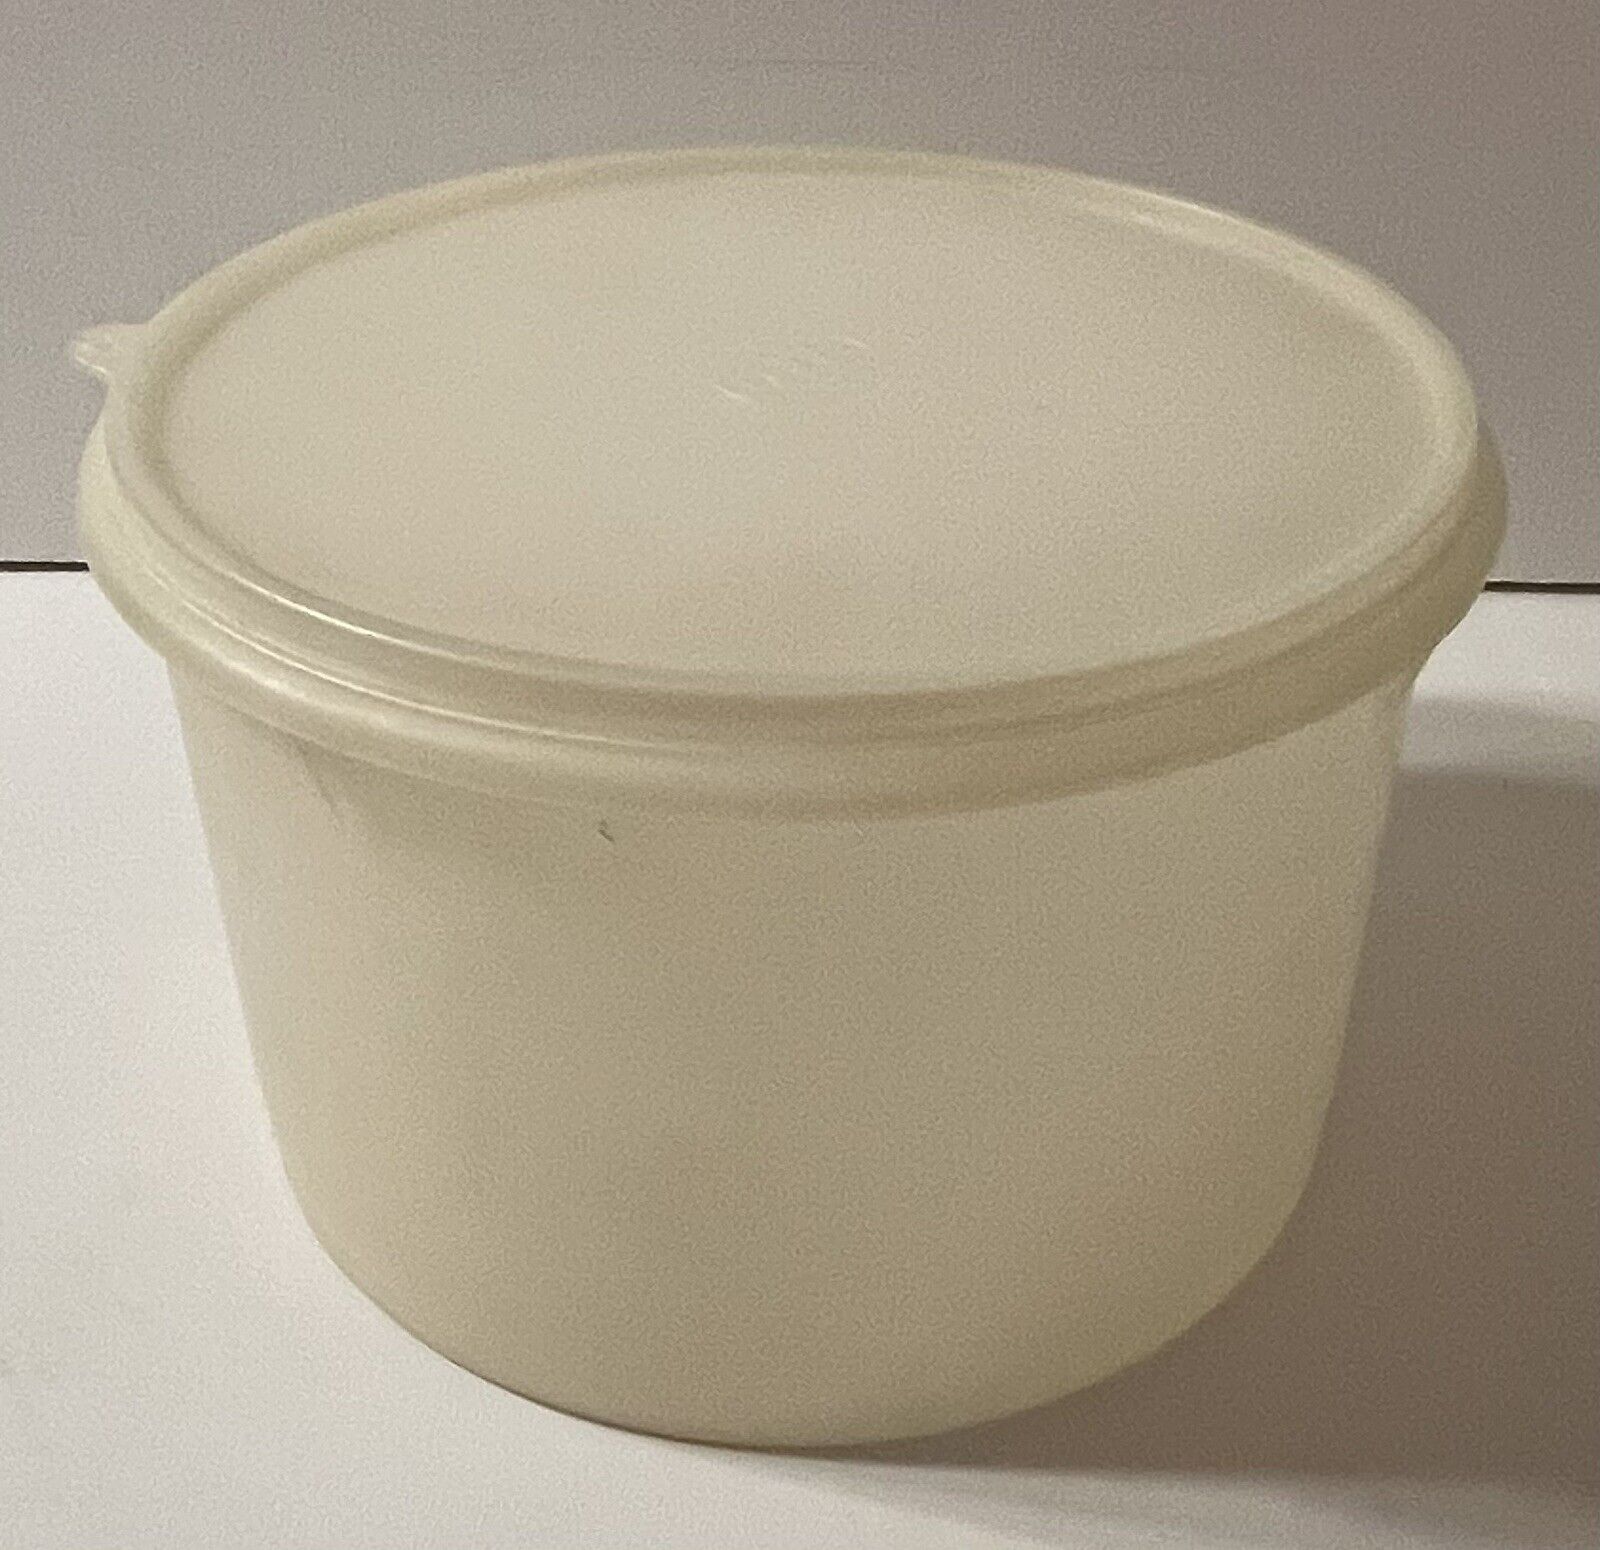 Vintage Tupperware Econo Canister Large Storage 267 Lid 230 20 Cup 5 Quart